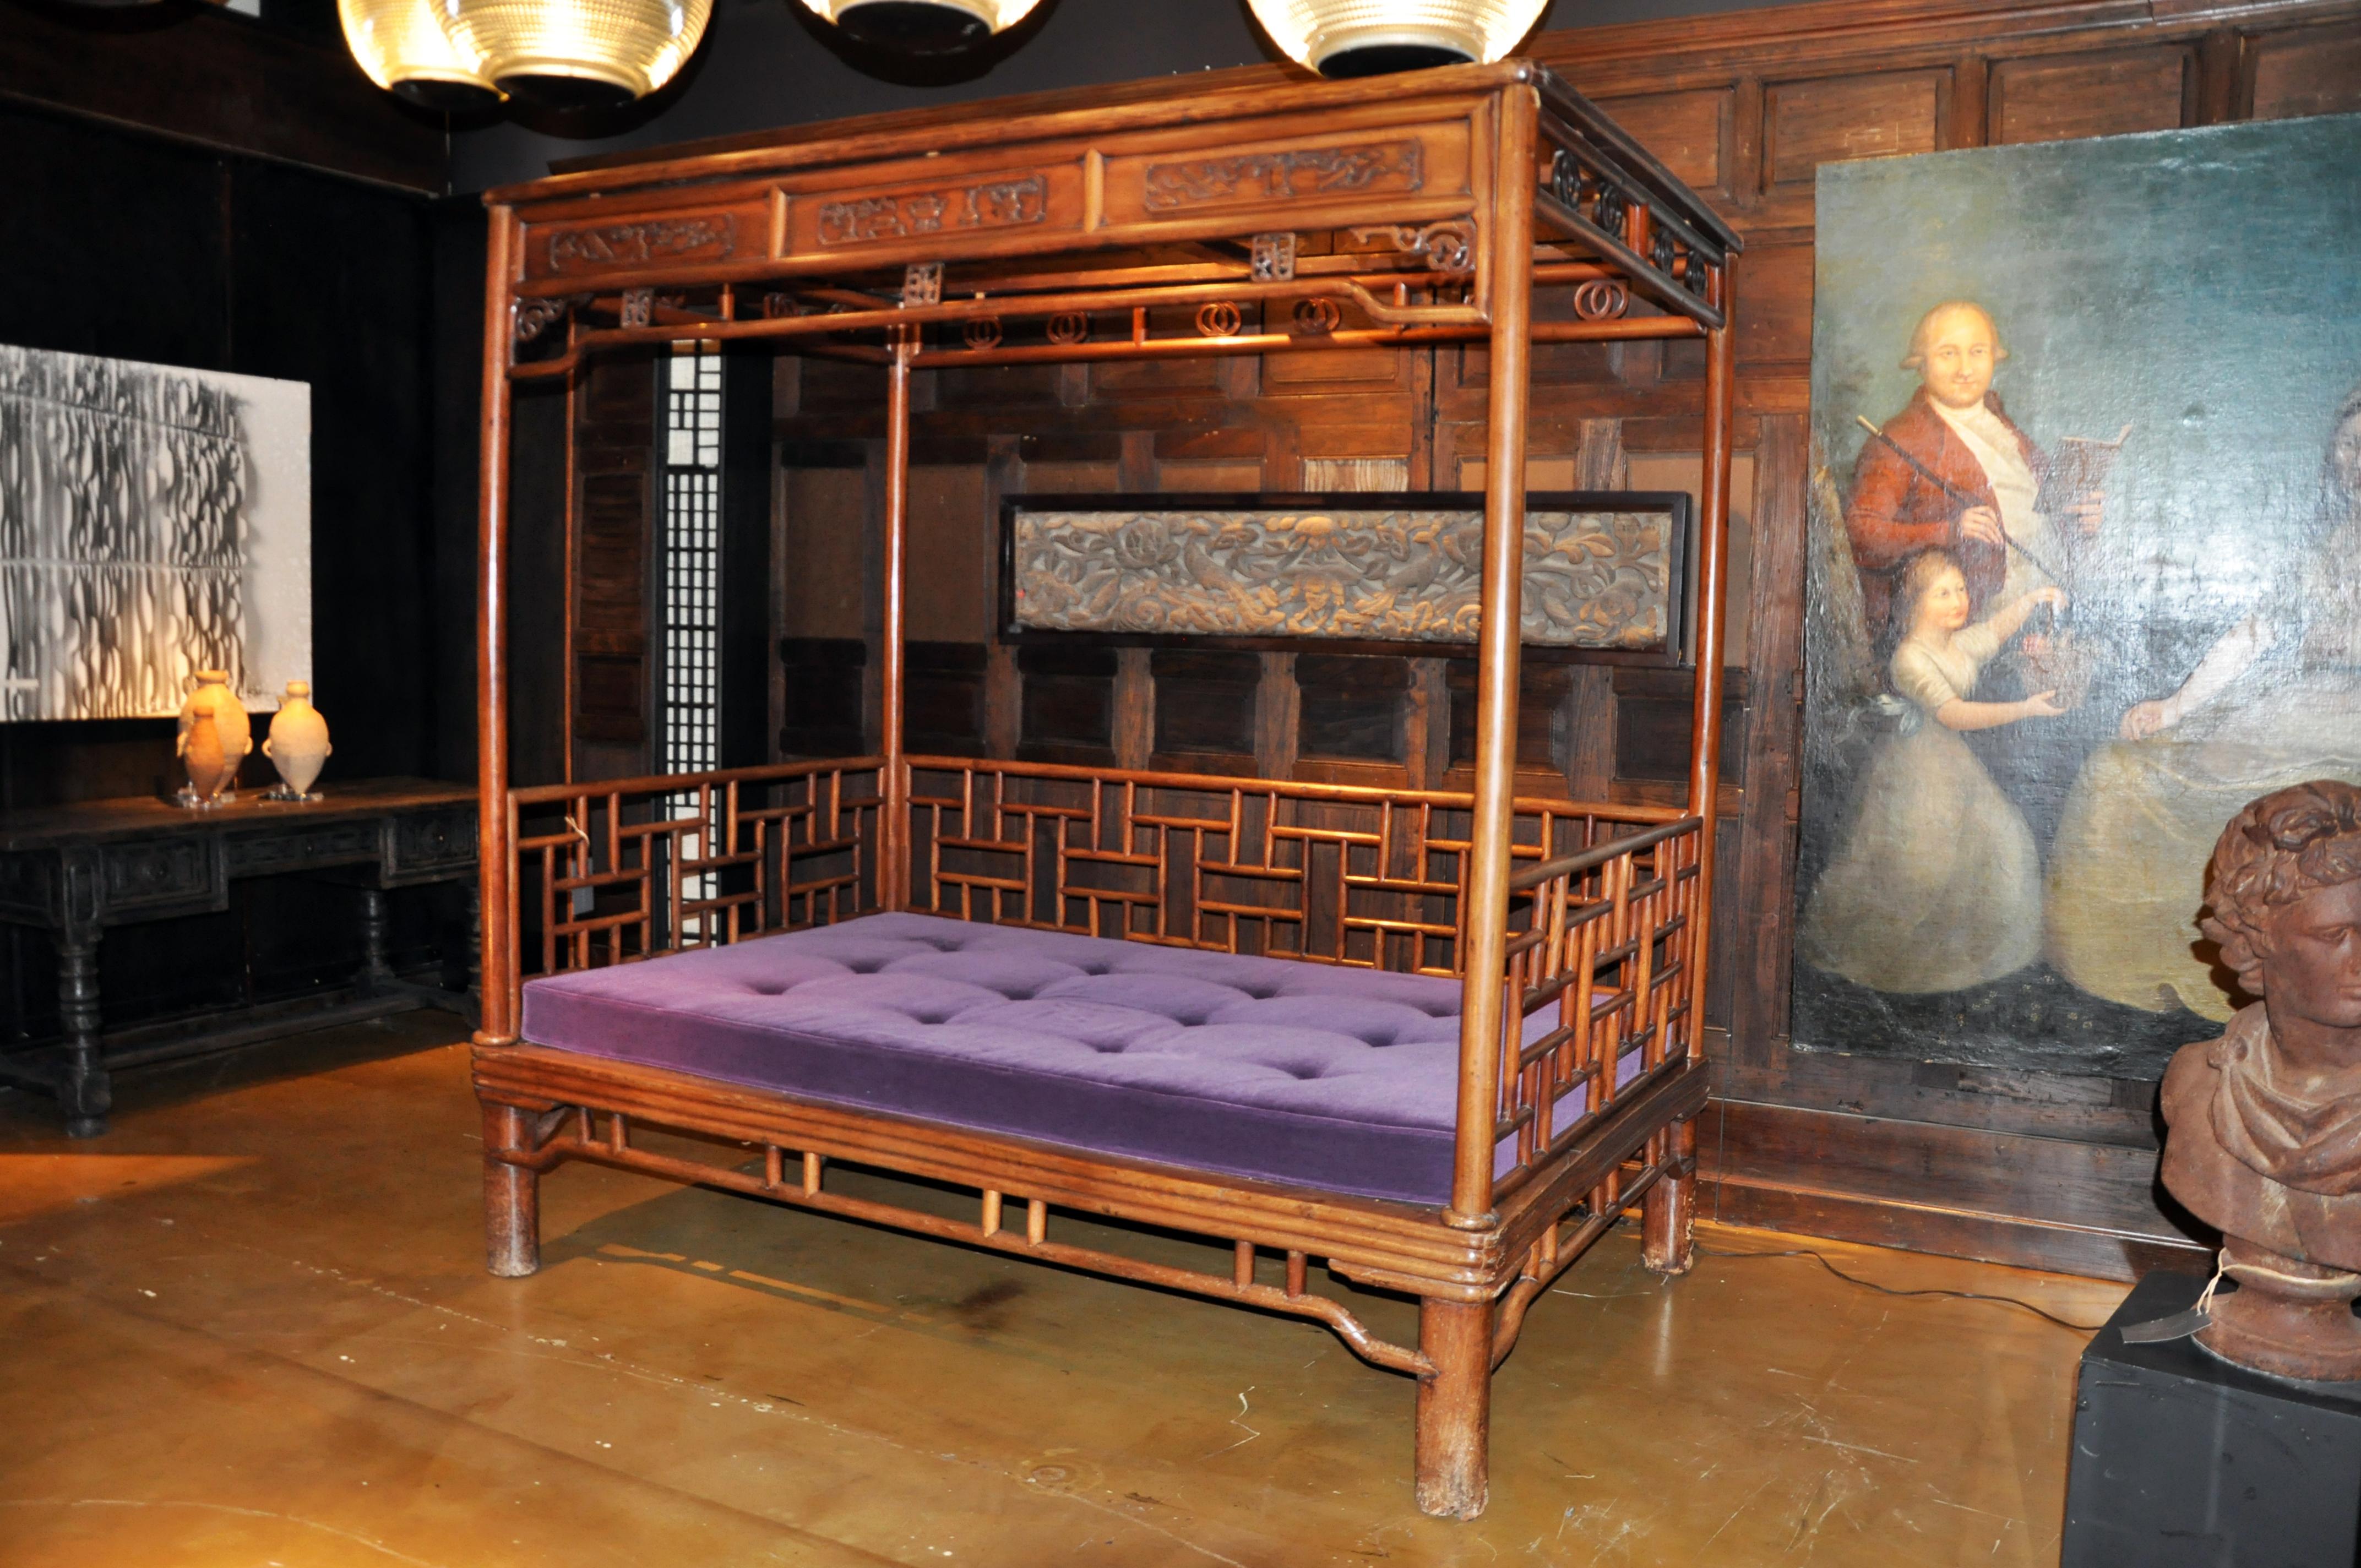 This traditional daybed dates to the early 1800s and is made from Ju Mu Wood (Southern Elm). It has a traditional Mingy Dynasty style with rounded-post canopy and bamboo-form bed frame. The jute cord webbing and woven rattan seating surface has been